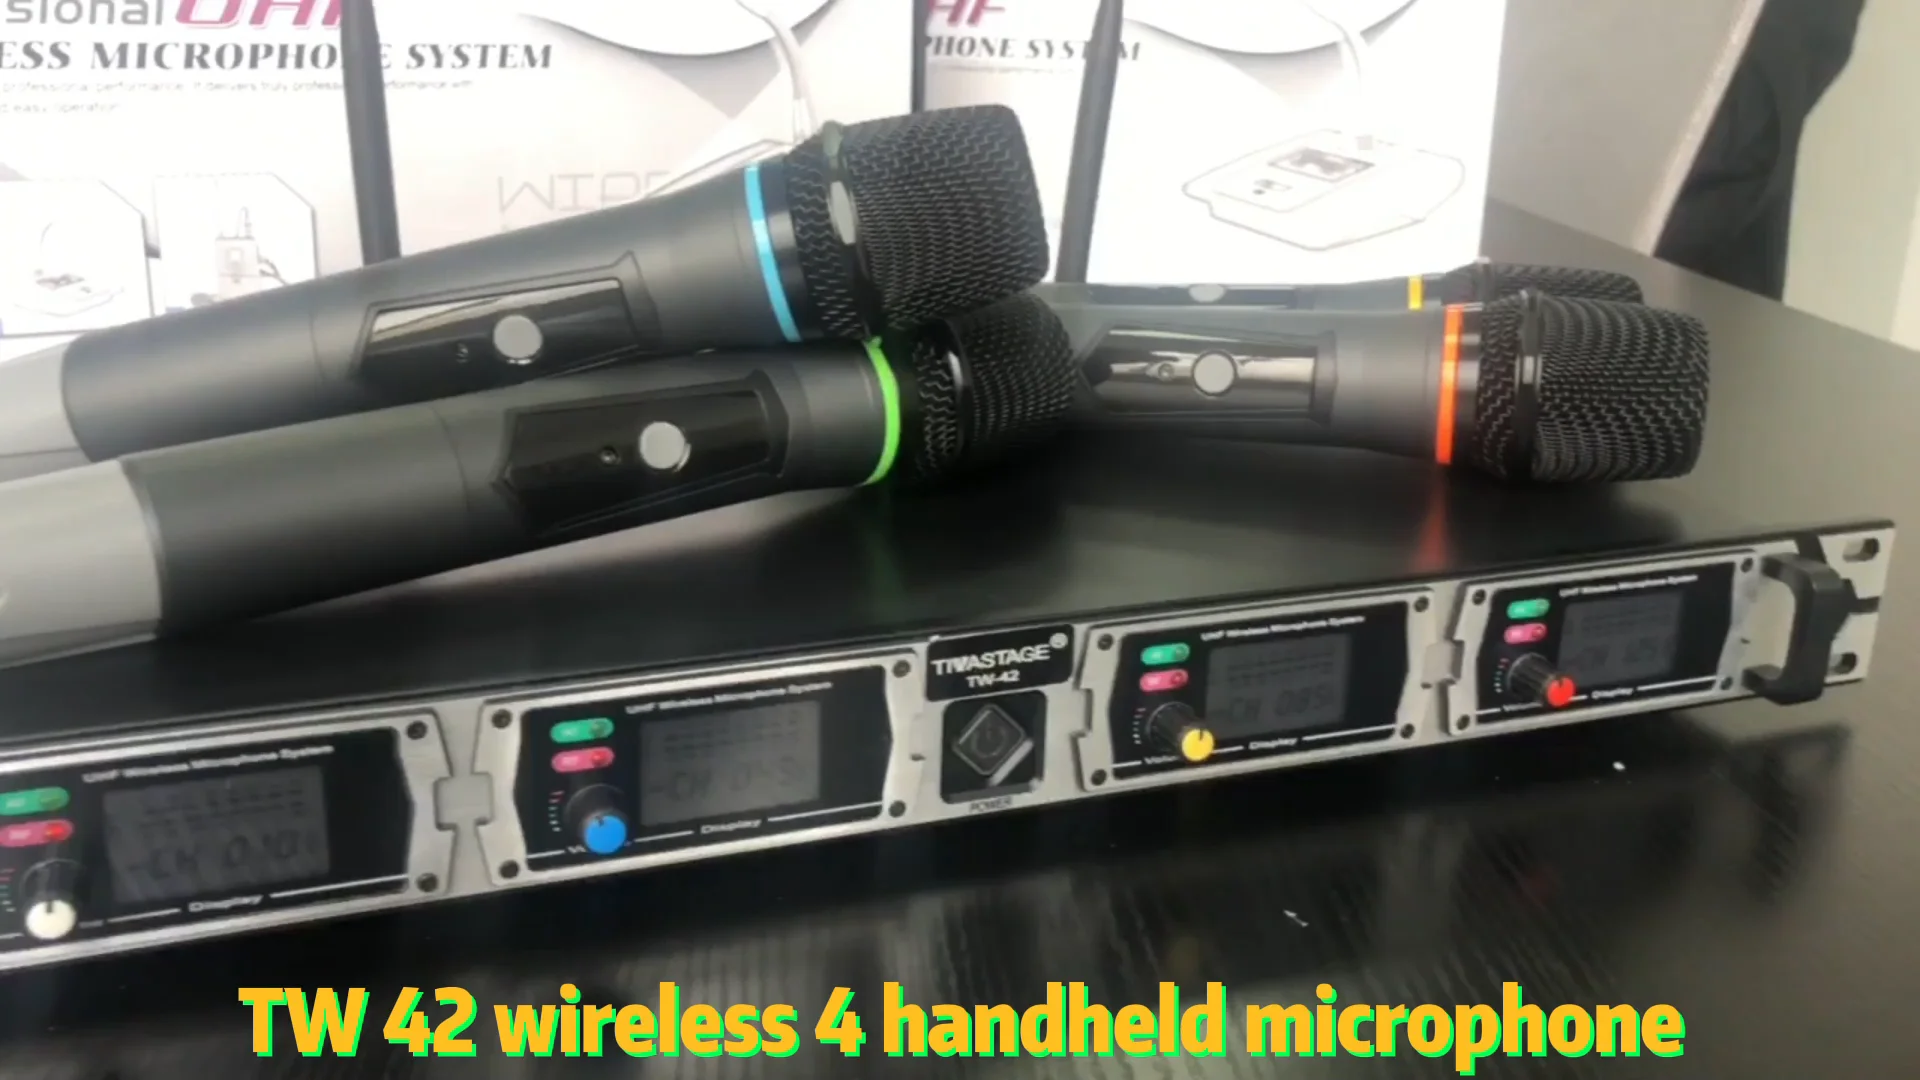 Tiwa 4 channels professional UHF wireless microphone with 4 handhelds/headsets/gooseneck mic enlarge